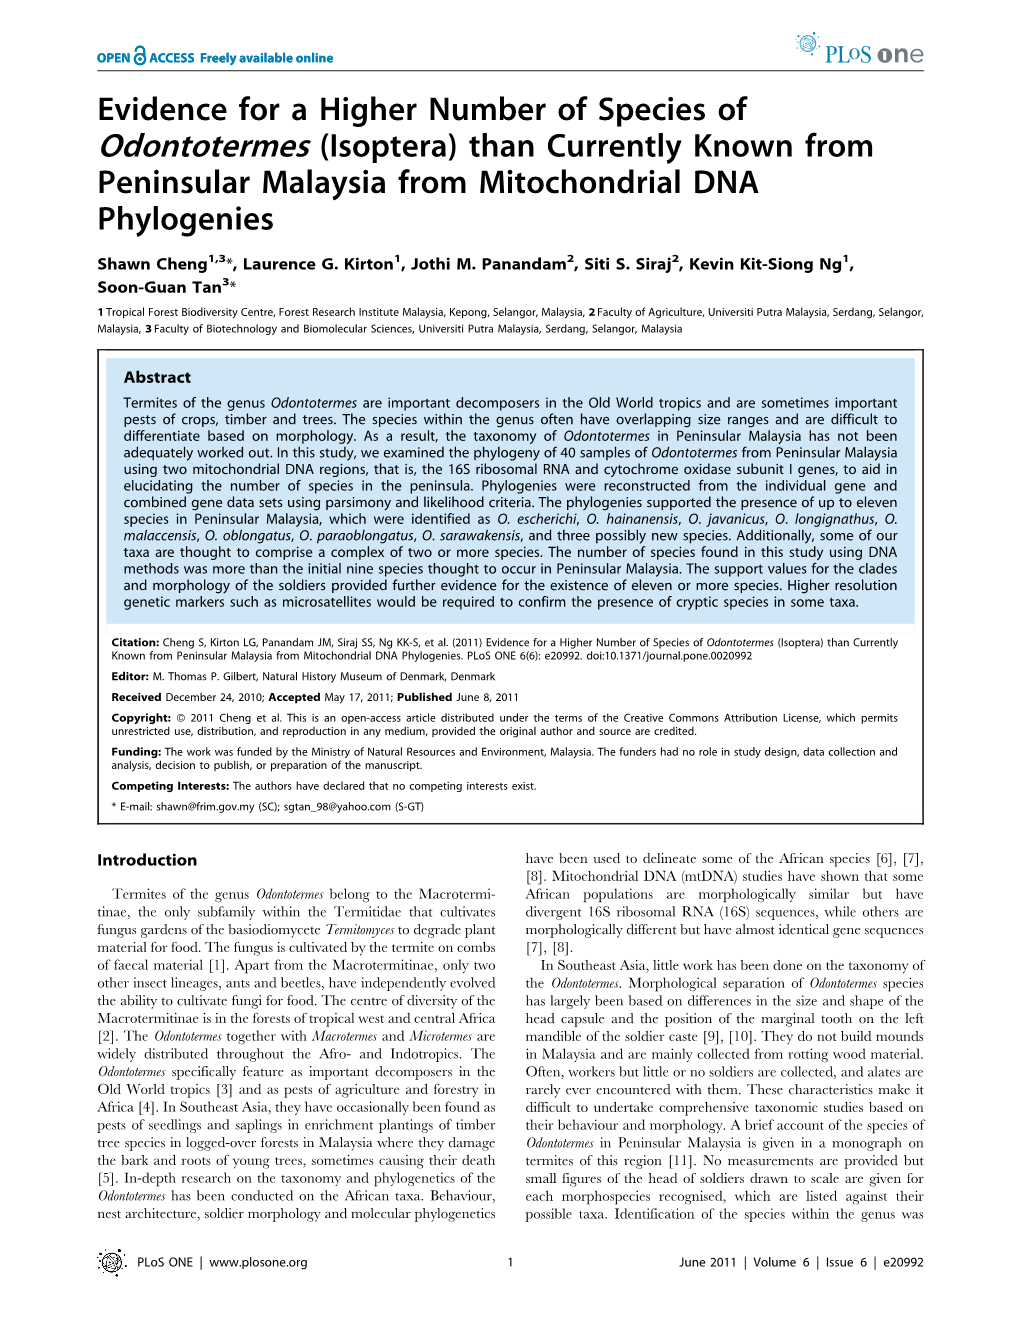 Evidence for a Higher Number of Species of Odontotermes (Isoptera) Than Currently Known from Peninsular Malaysia from Mitochondrial DNA Phylogenies